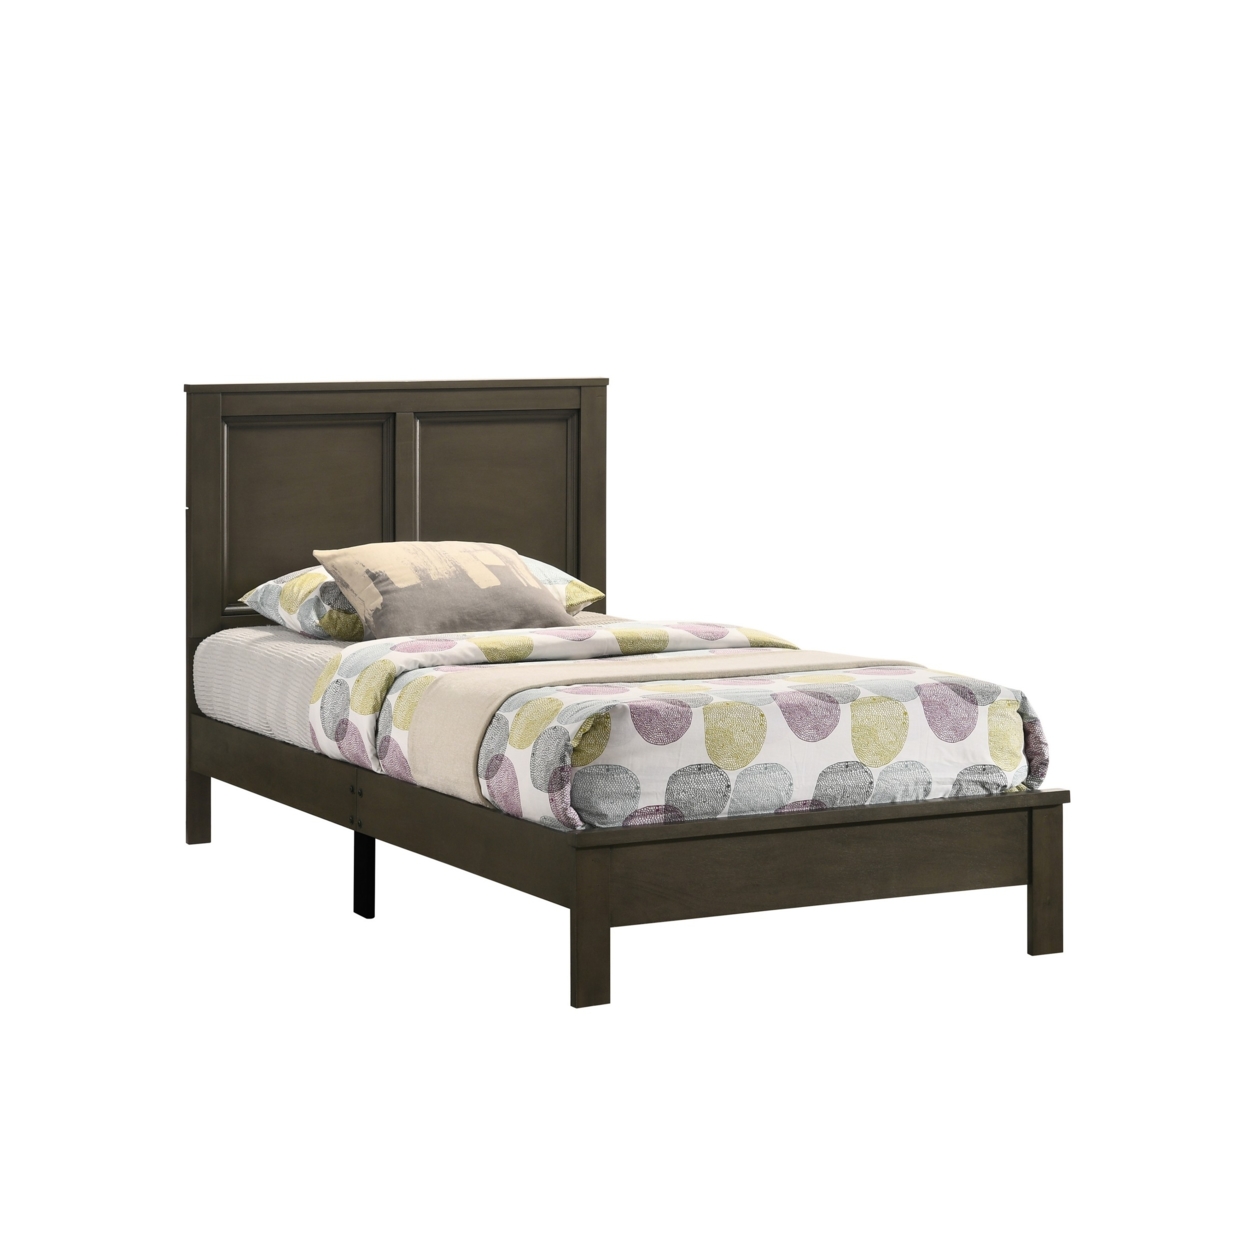 Isla Twin Size Panel Bed With Low Profile Rubberwood Frame, Taupe Brown- Saltoro Sherpi